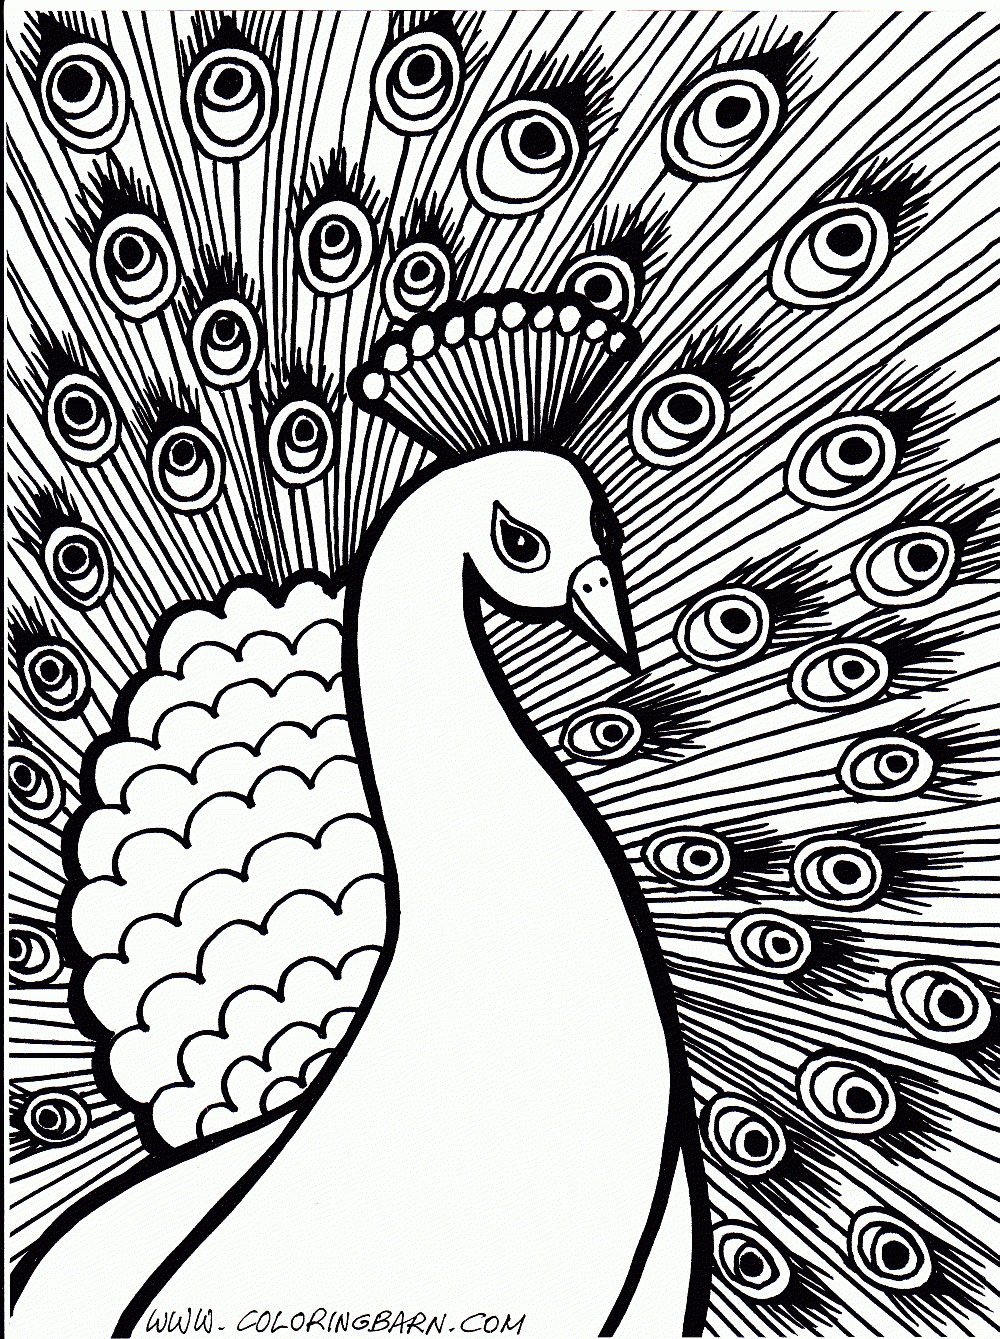 Free Printable Peacock Coloring Pages For Kids | Coloring Peacocks - Free Printable Peacock Pictures